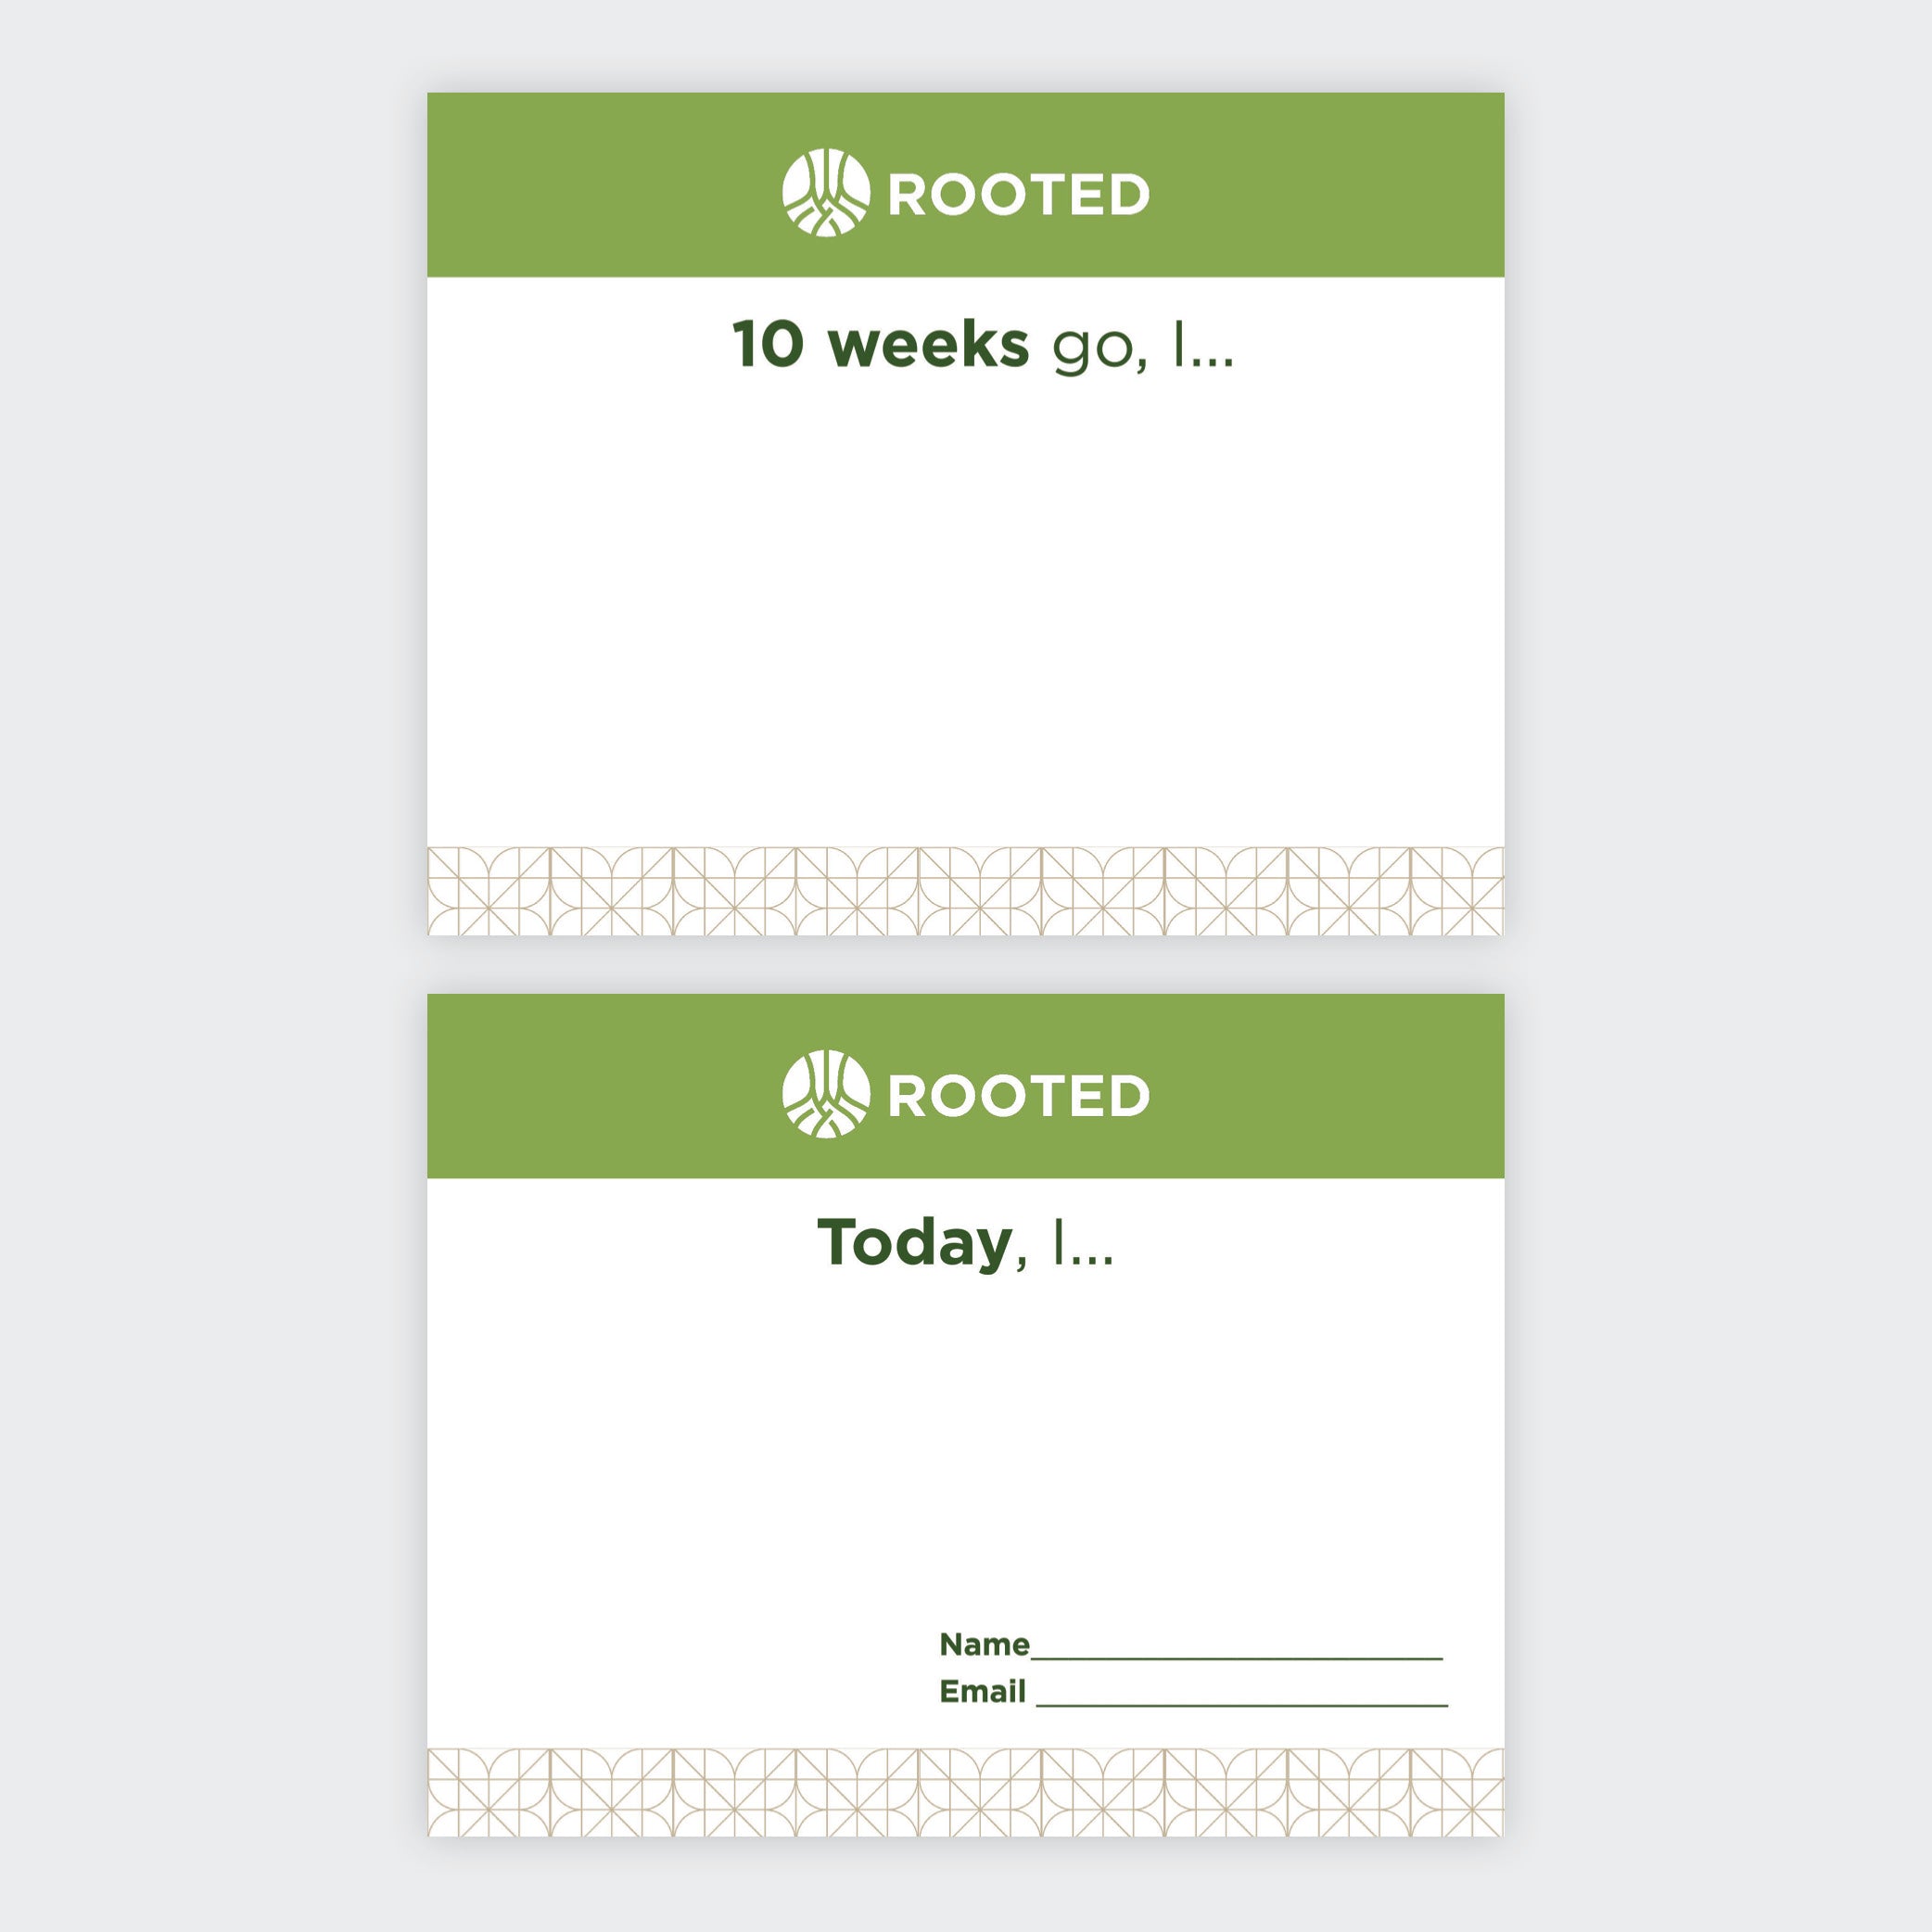 Rooted Testimony Cards